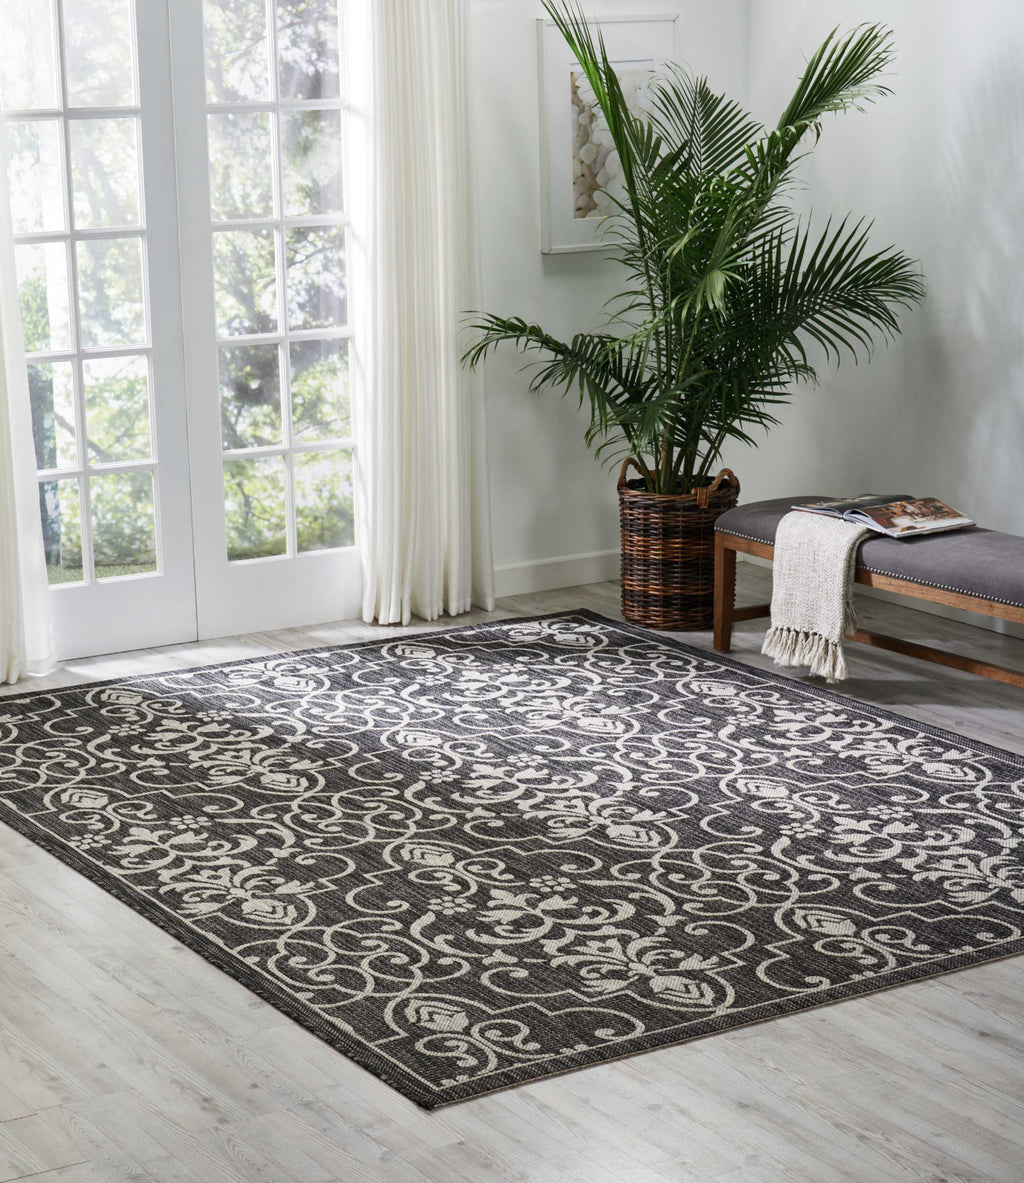 Nourison Garden Party GRD04 Charcoal Area Rug Room Image Feature